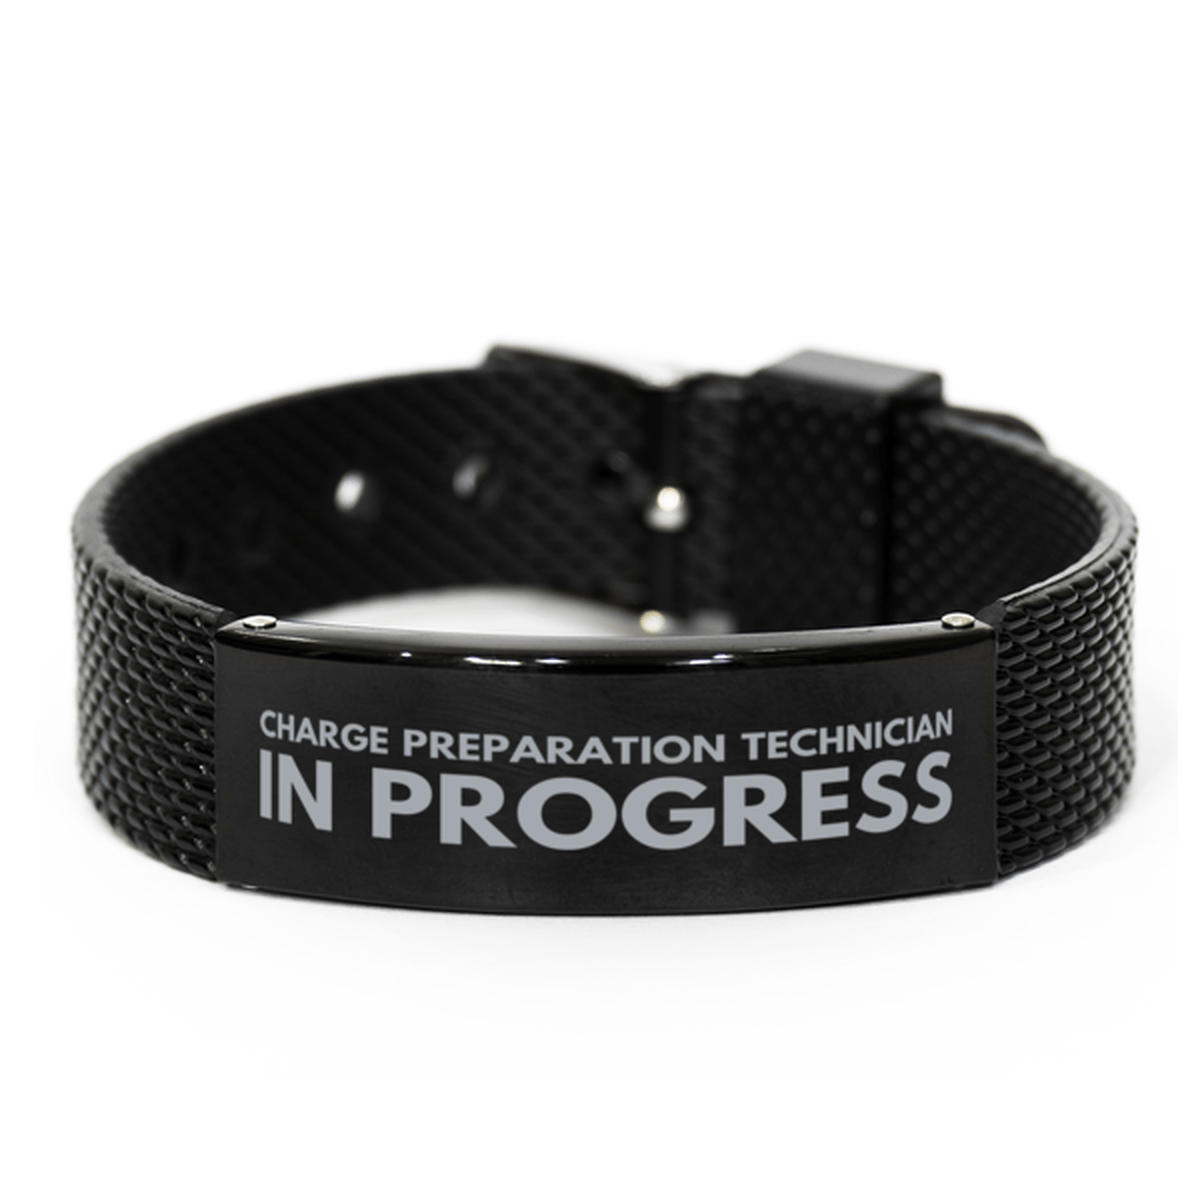 Inspirational Charge Preparation Technician Black Shark Mesh Bracelet, Charge Preparation Technician In Progress, Best Graduation Gifts for Students